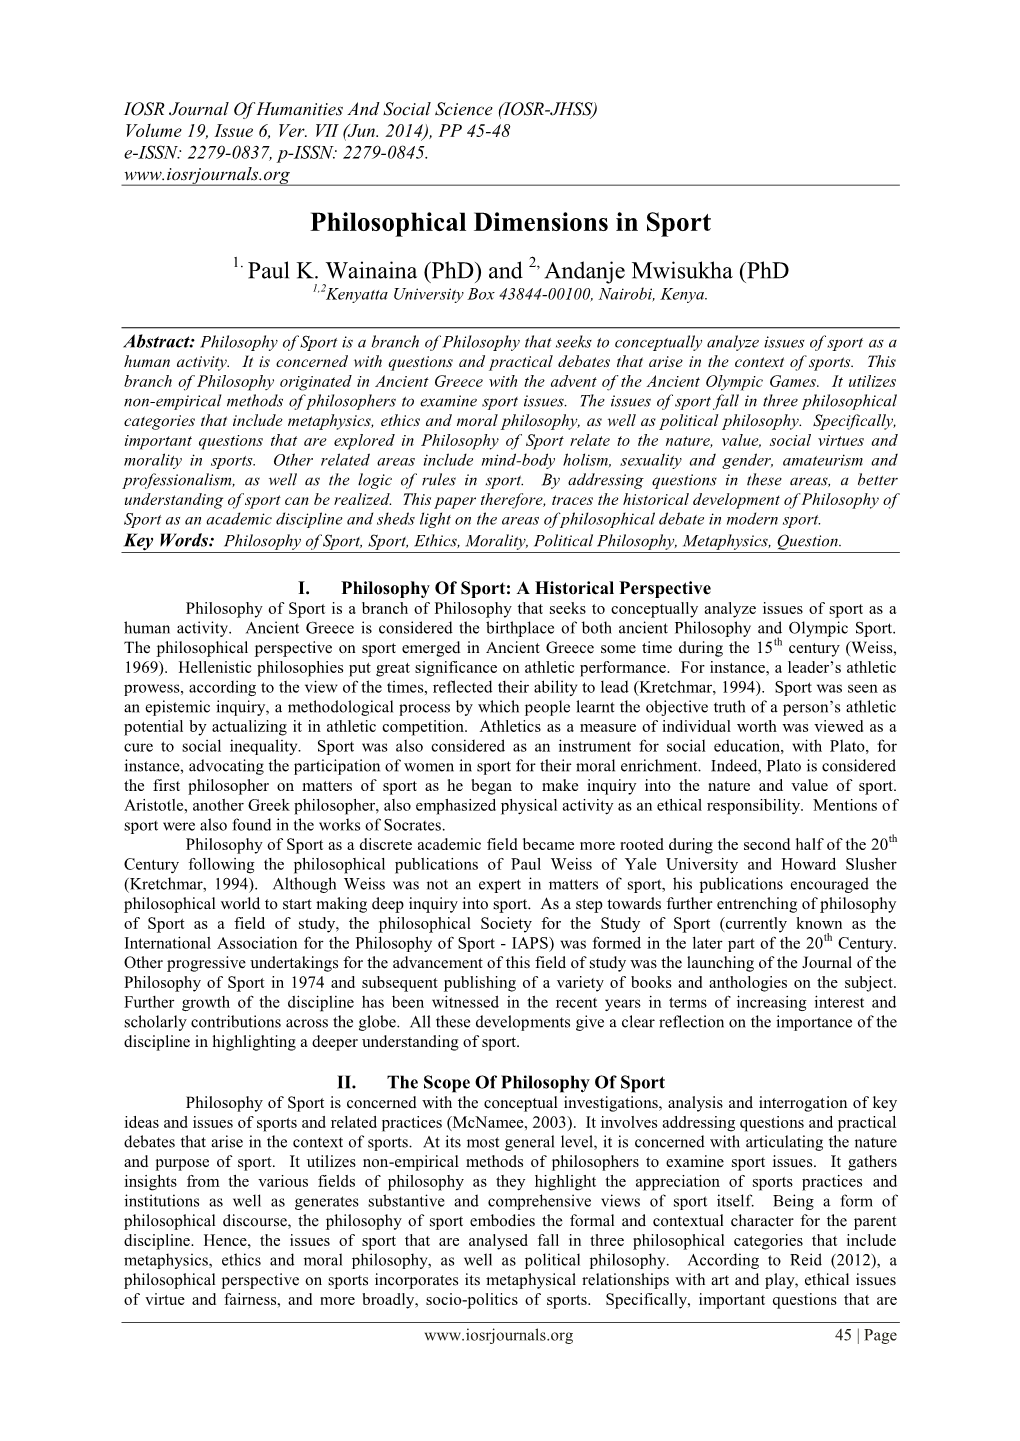 Philosophical Dimensions in Sport